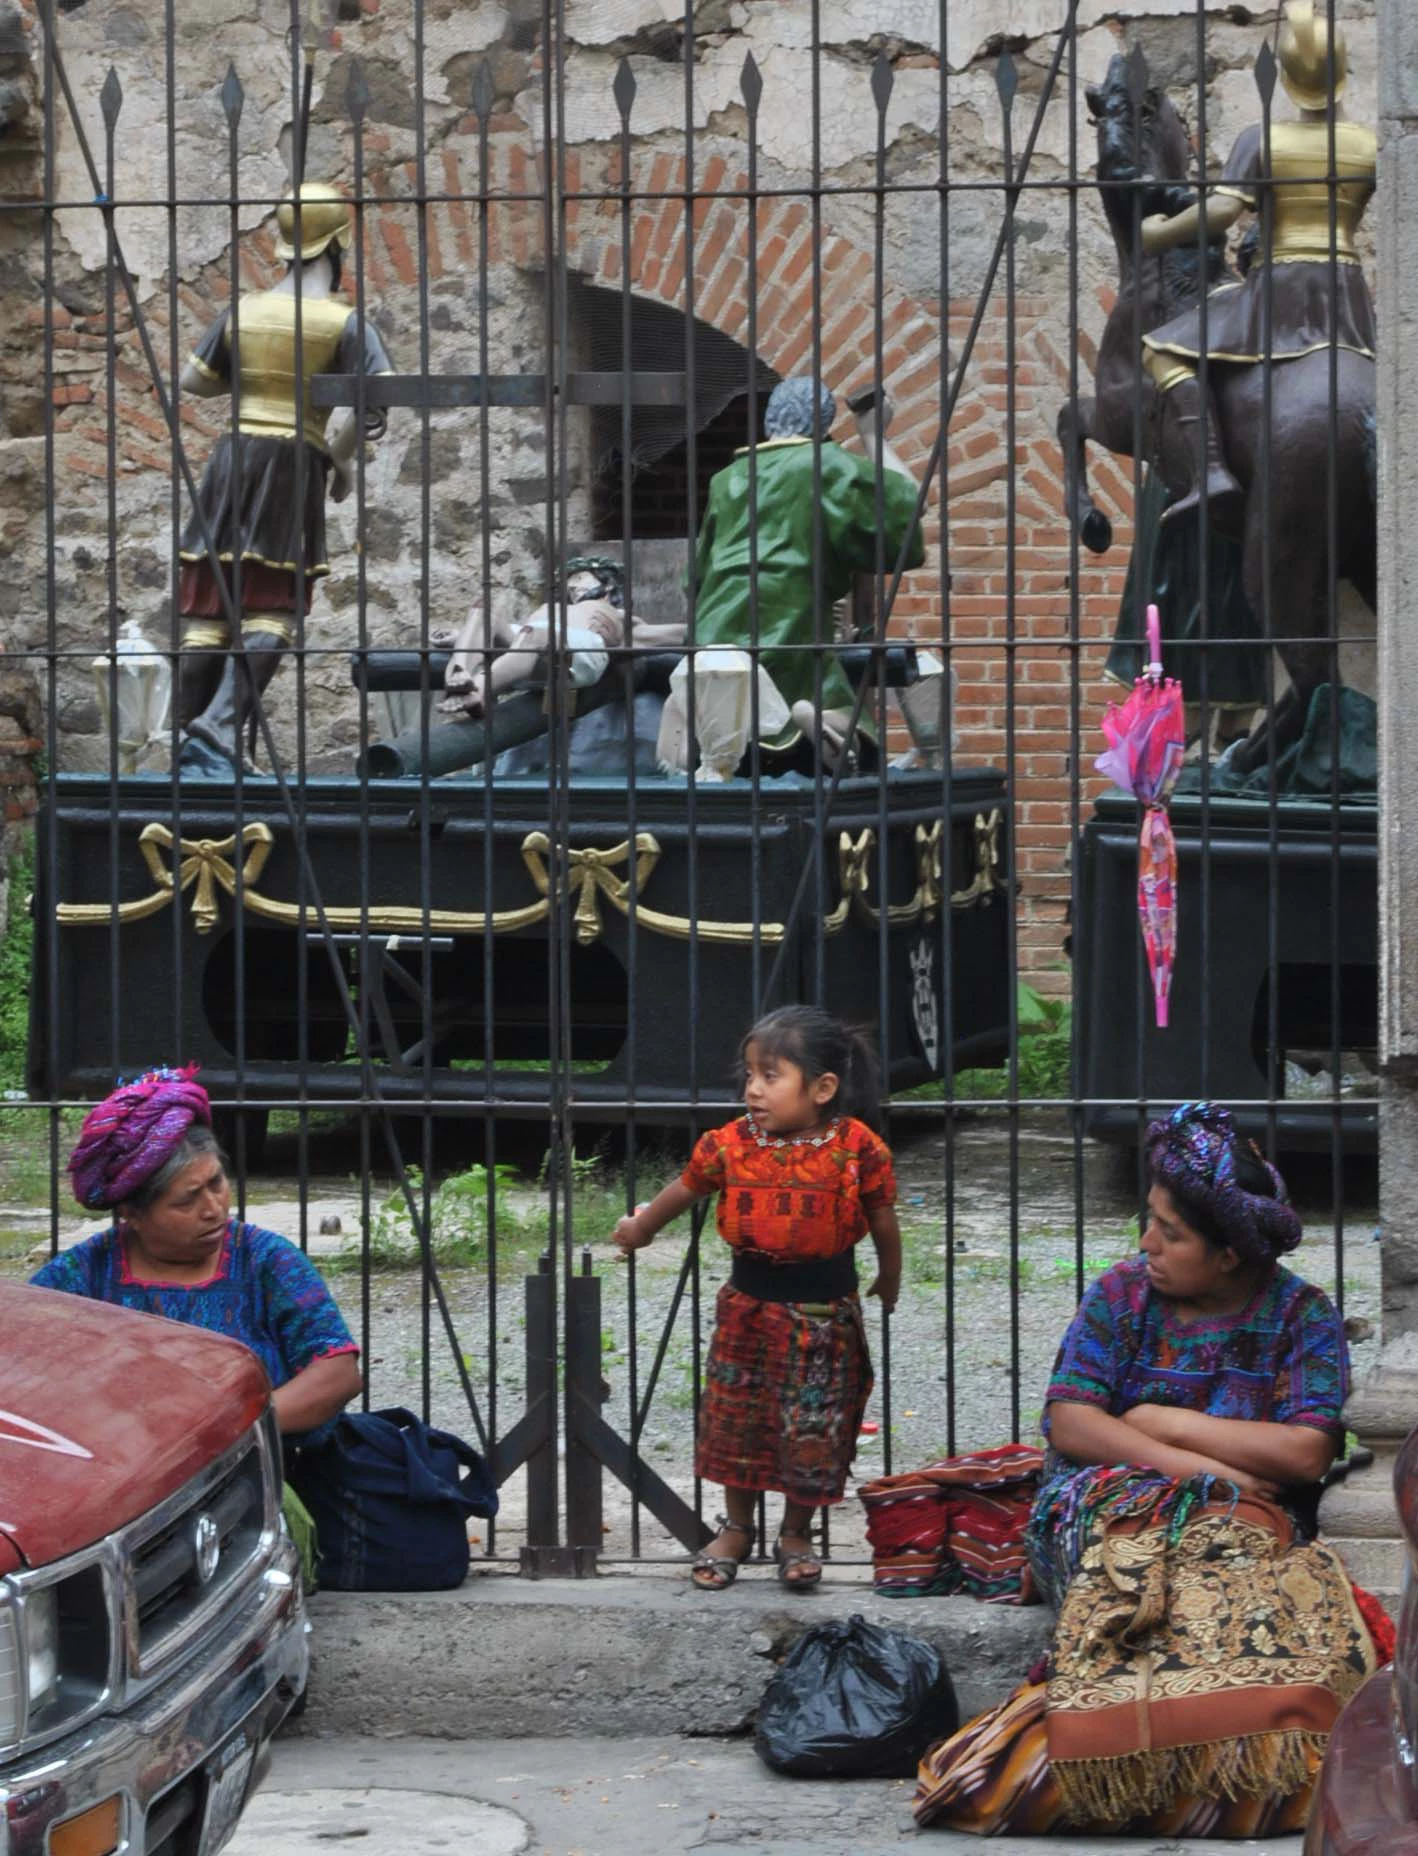 Artisans rest near a couple of pasos, the religious wooden statues used during the Easter processions